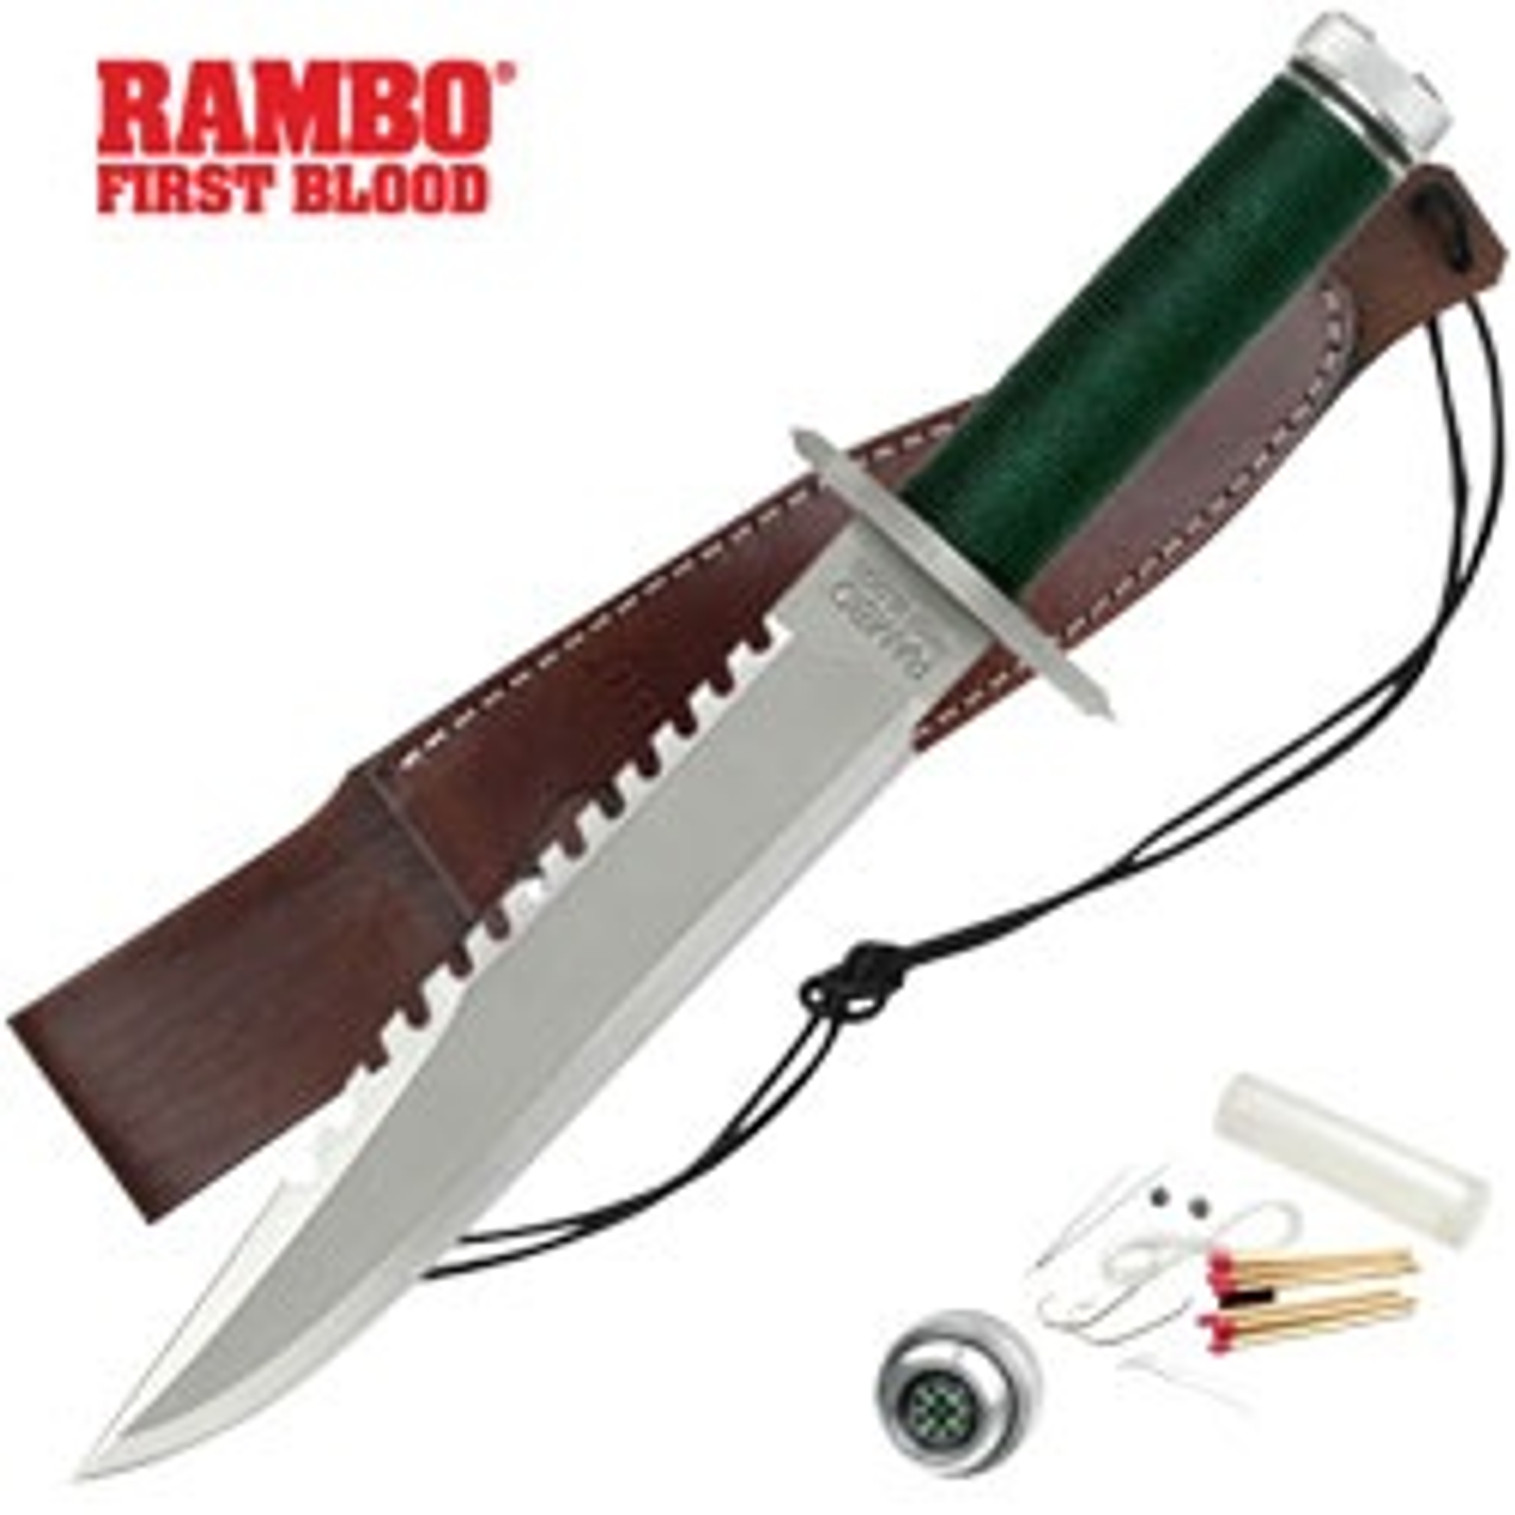 RAMBO knife First Blood Part II Standard Edition with survival kit, 9294